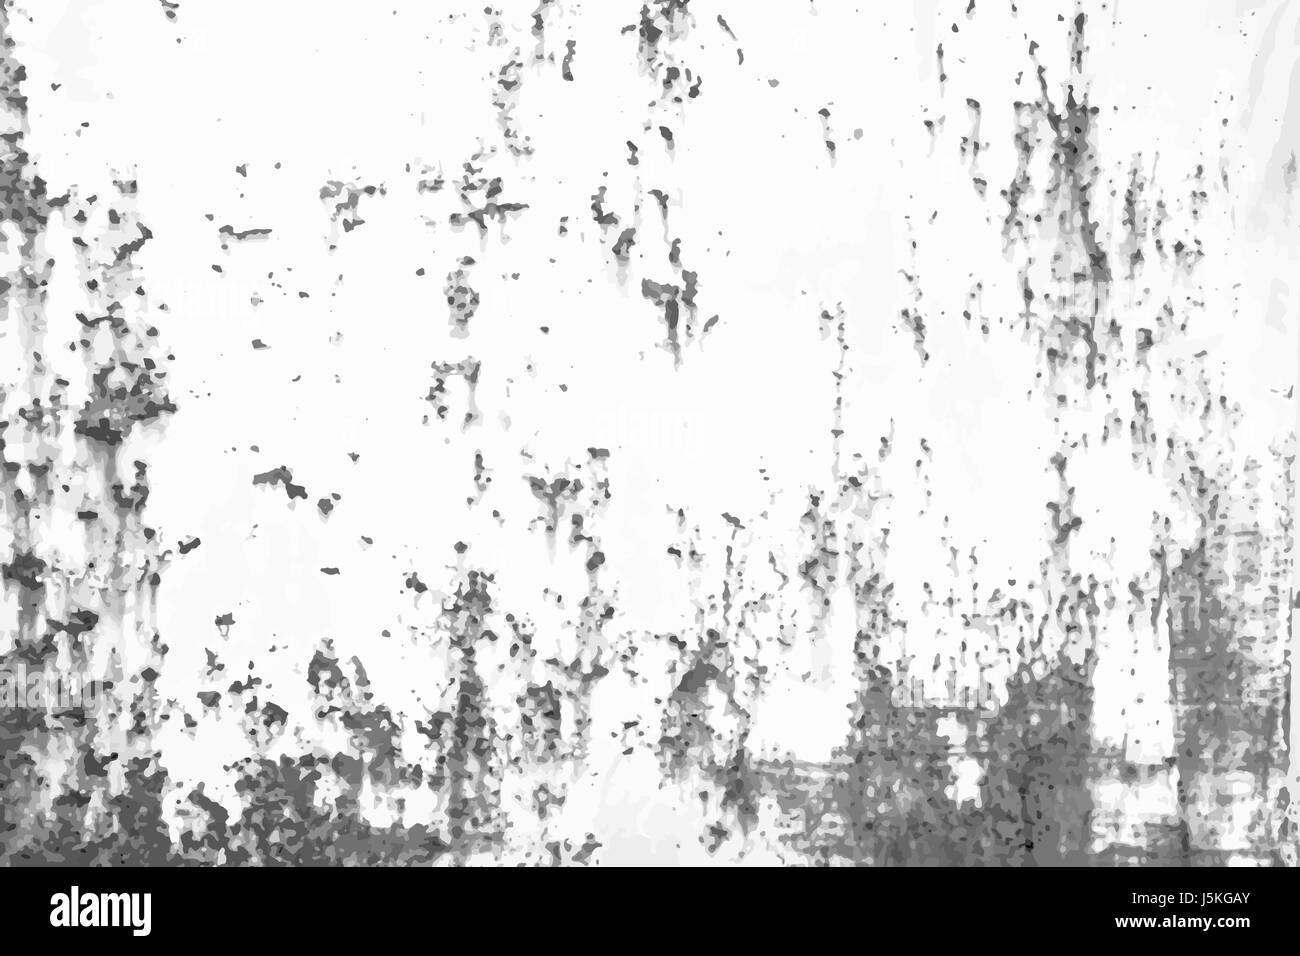 Rusted metal vintage effect background. Grunge black and white vector texture template for overlay artwork. Stock Vector